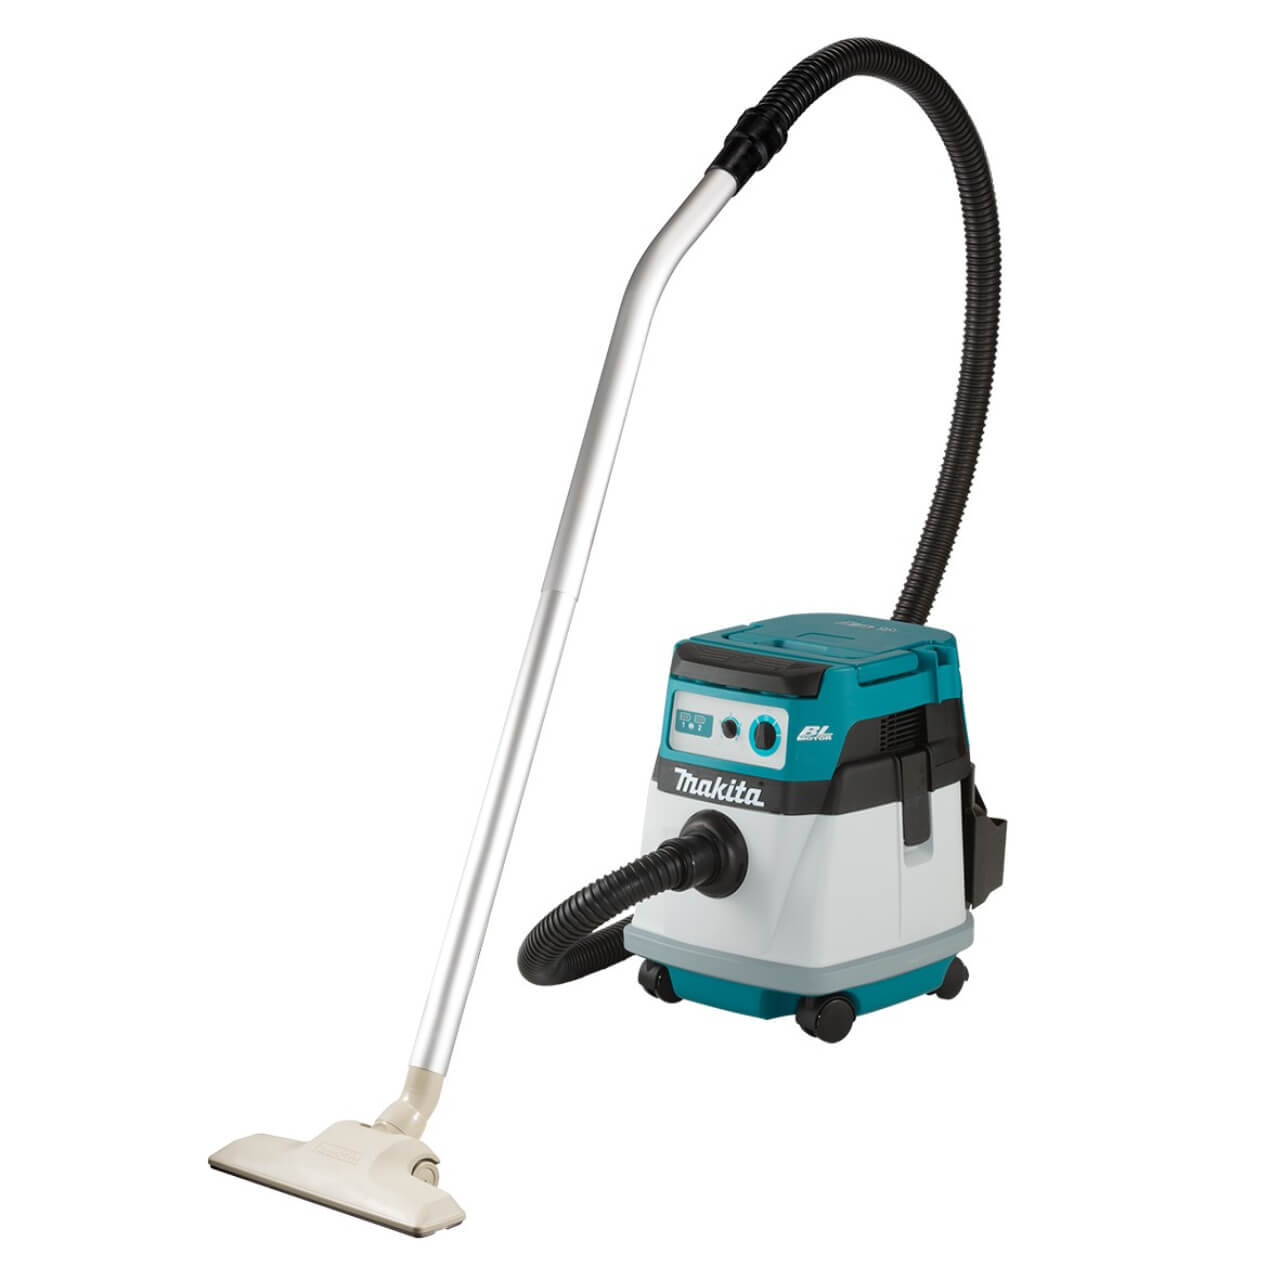 Makita 18Vx2 BRUSHLESS Wet/Dry Dust Extraction Vacuum - Tool Only